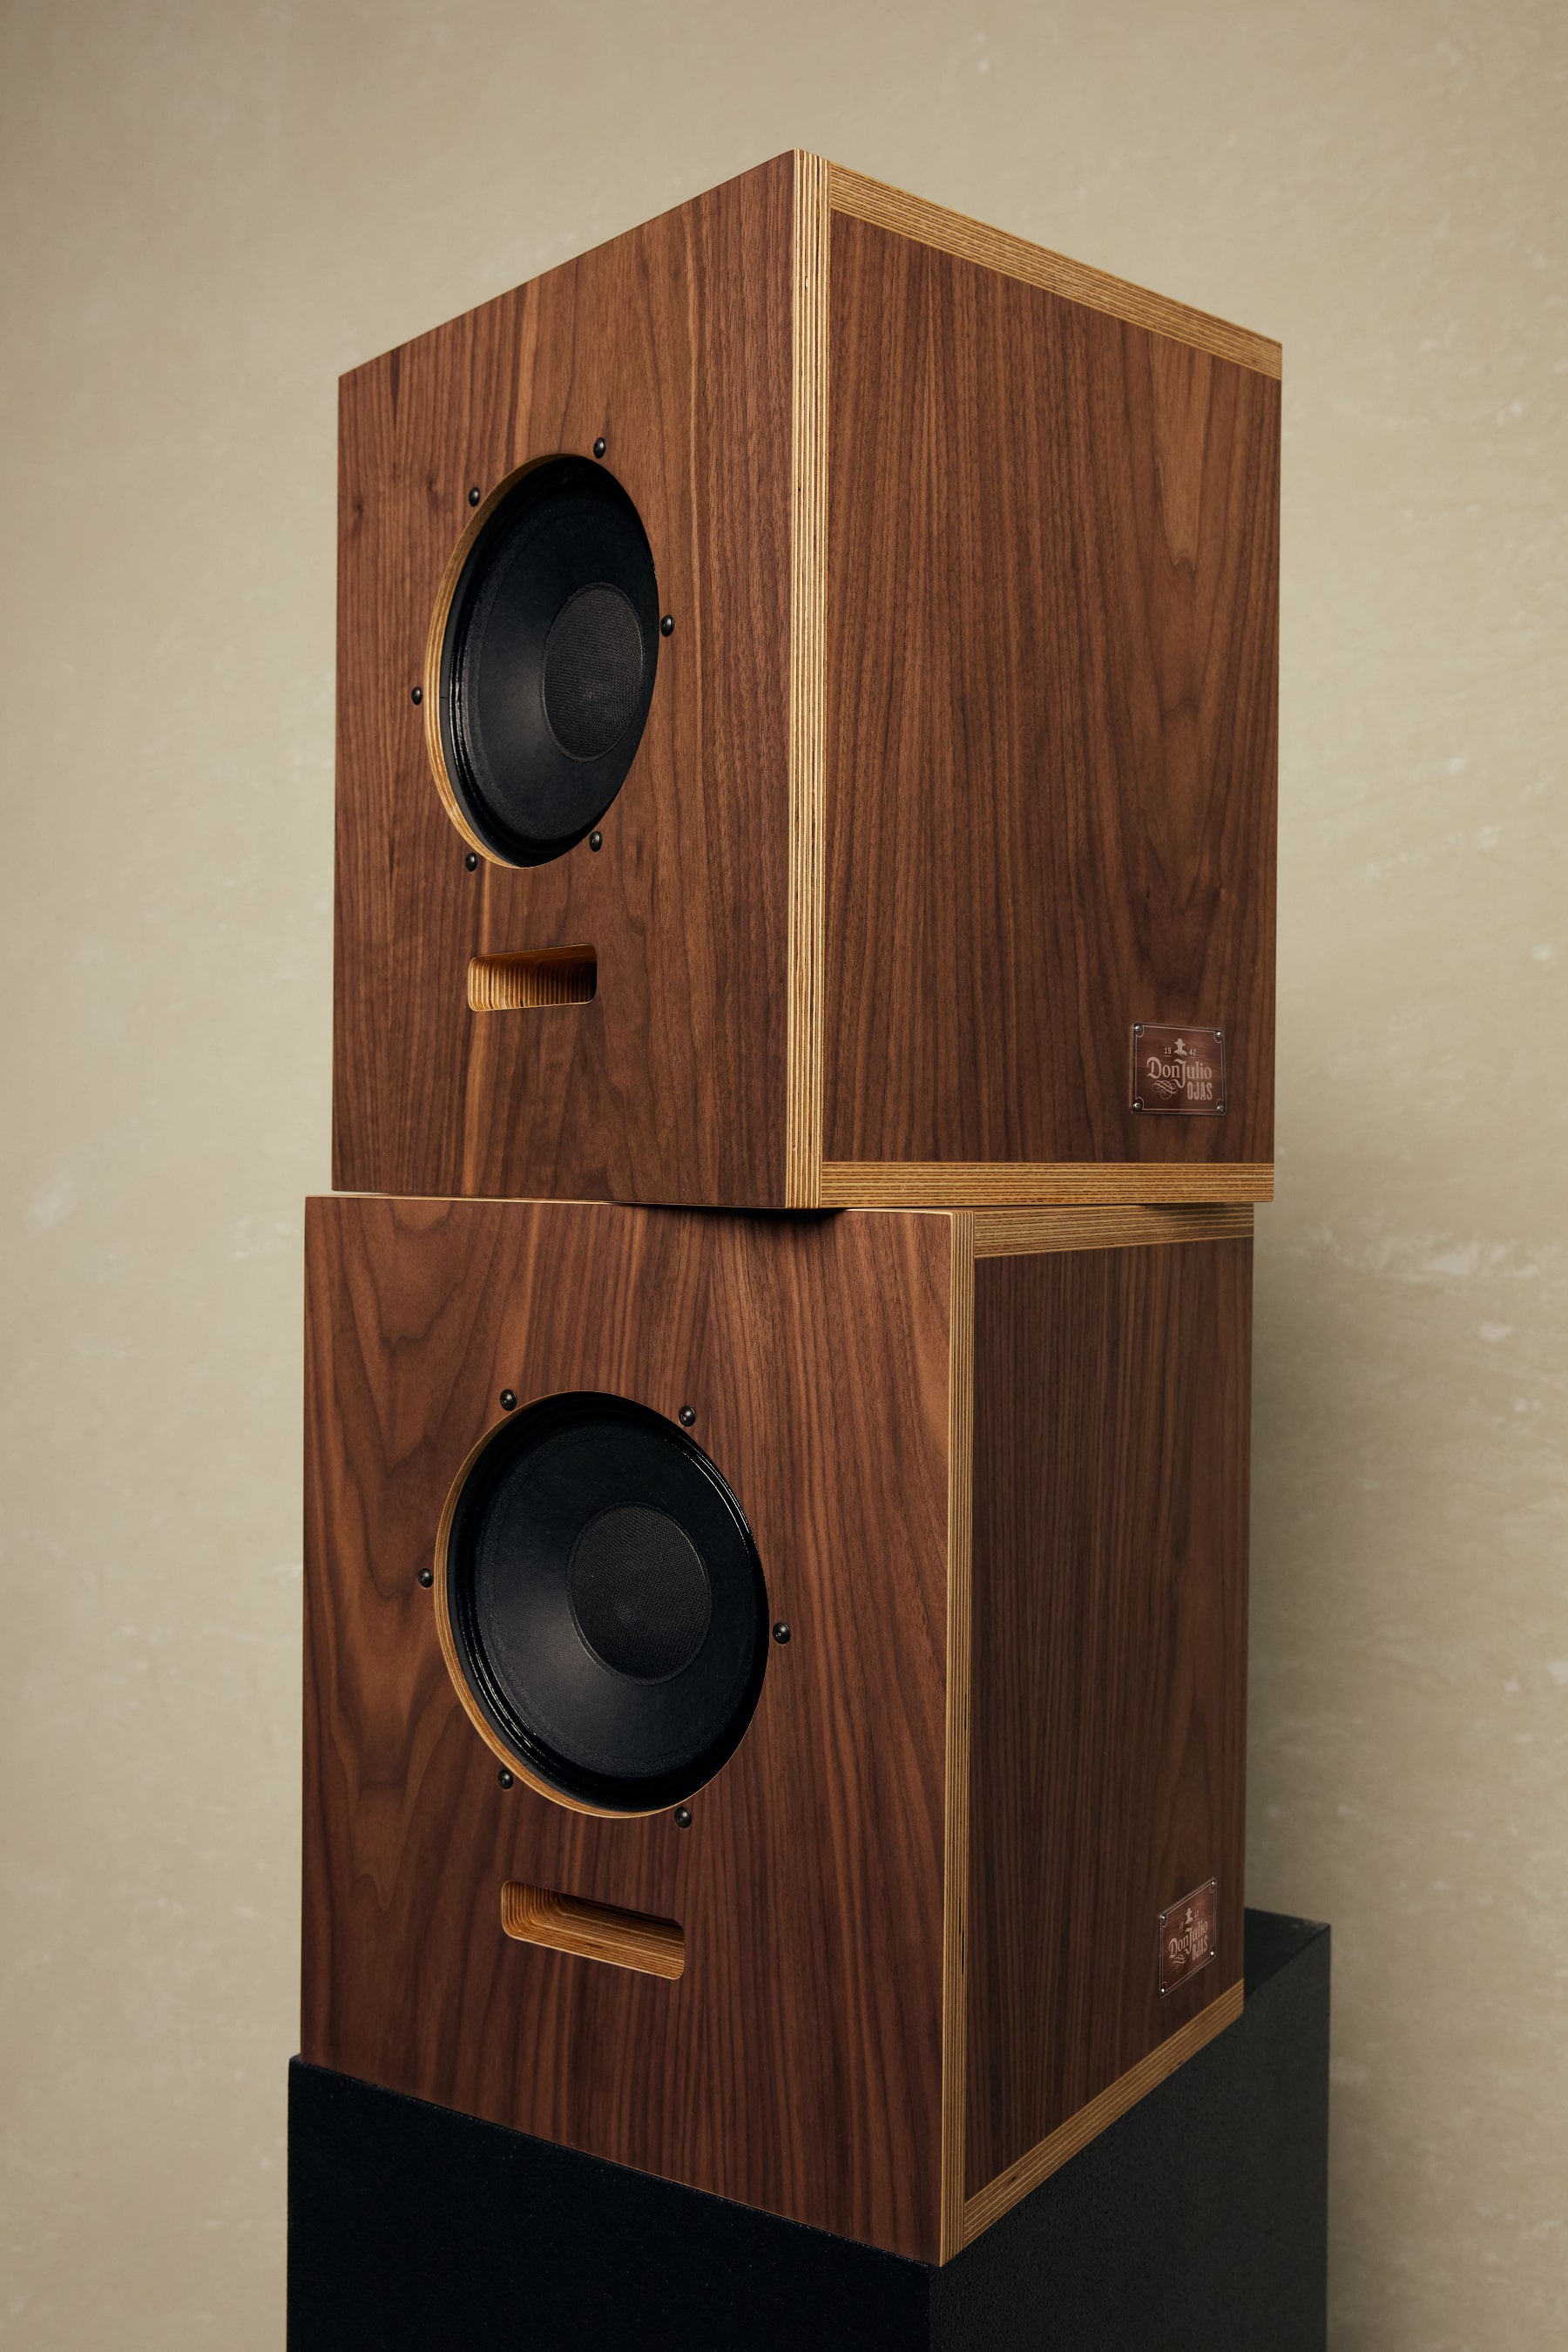 An extremely limited amount of the at-home Tequila Don Julio 1942 X OJAS Artbook Shelf Speakers will drop on OJAS.NYC on December 6th for an SRP of $6,000.